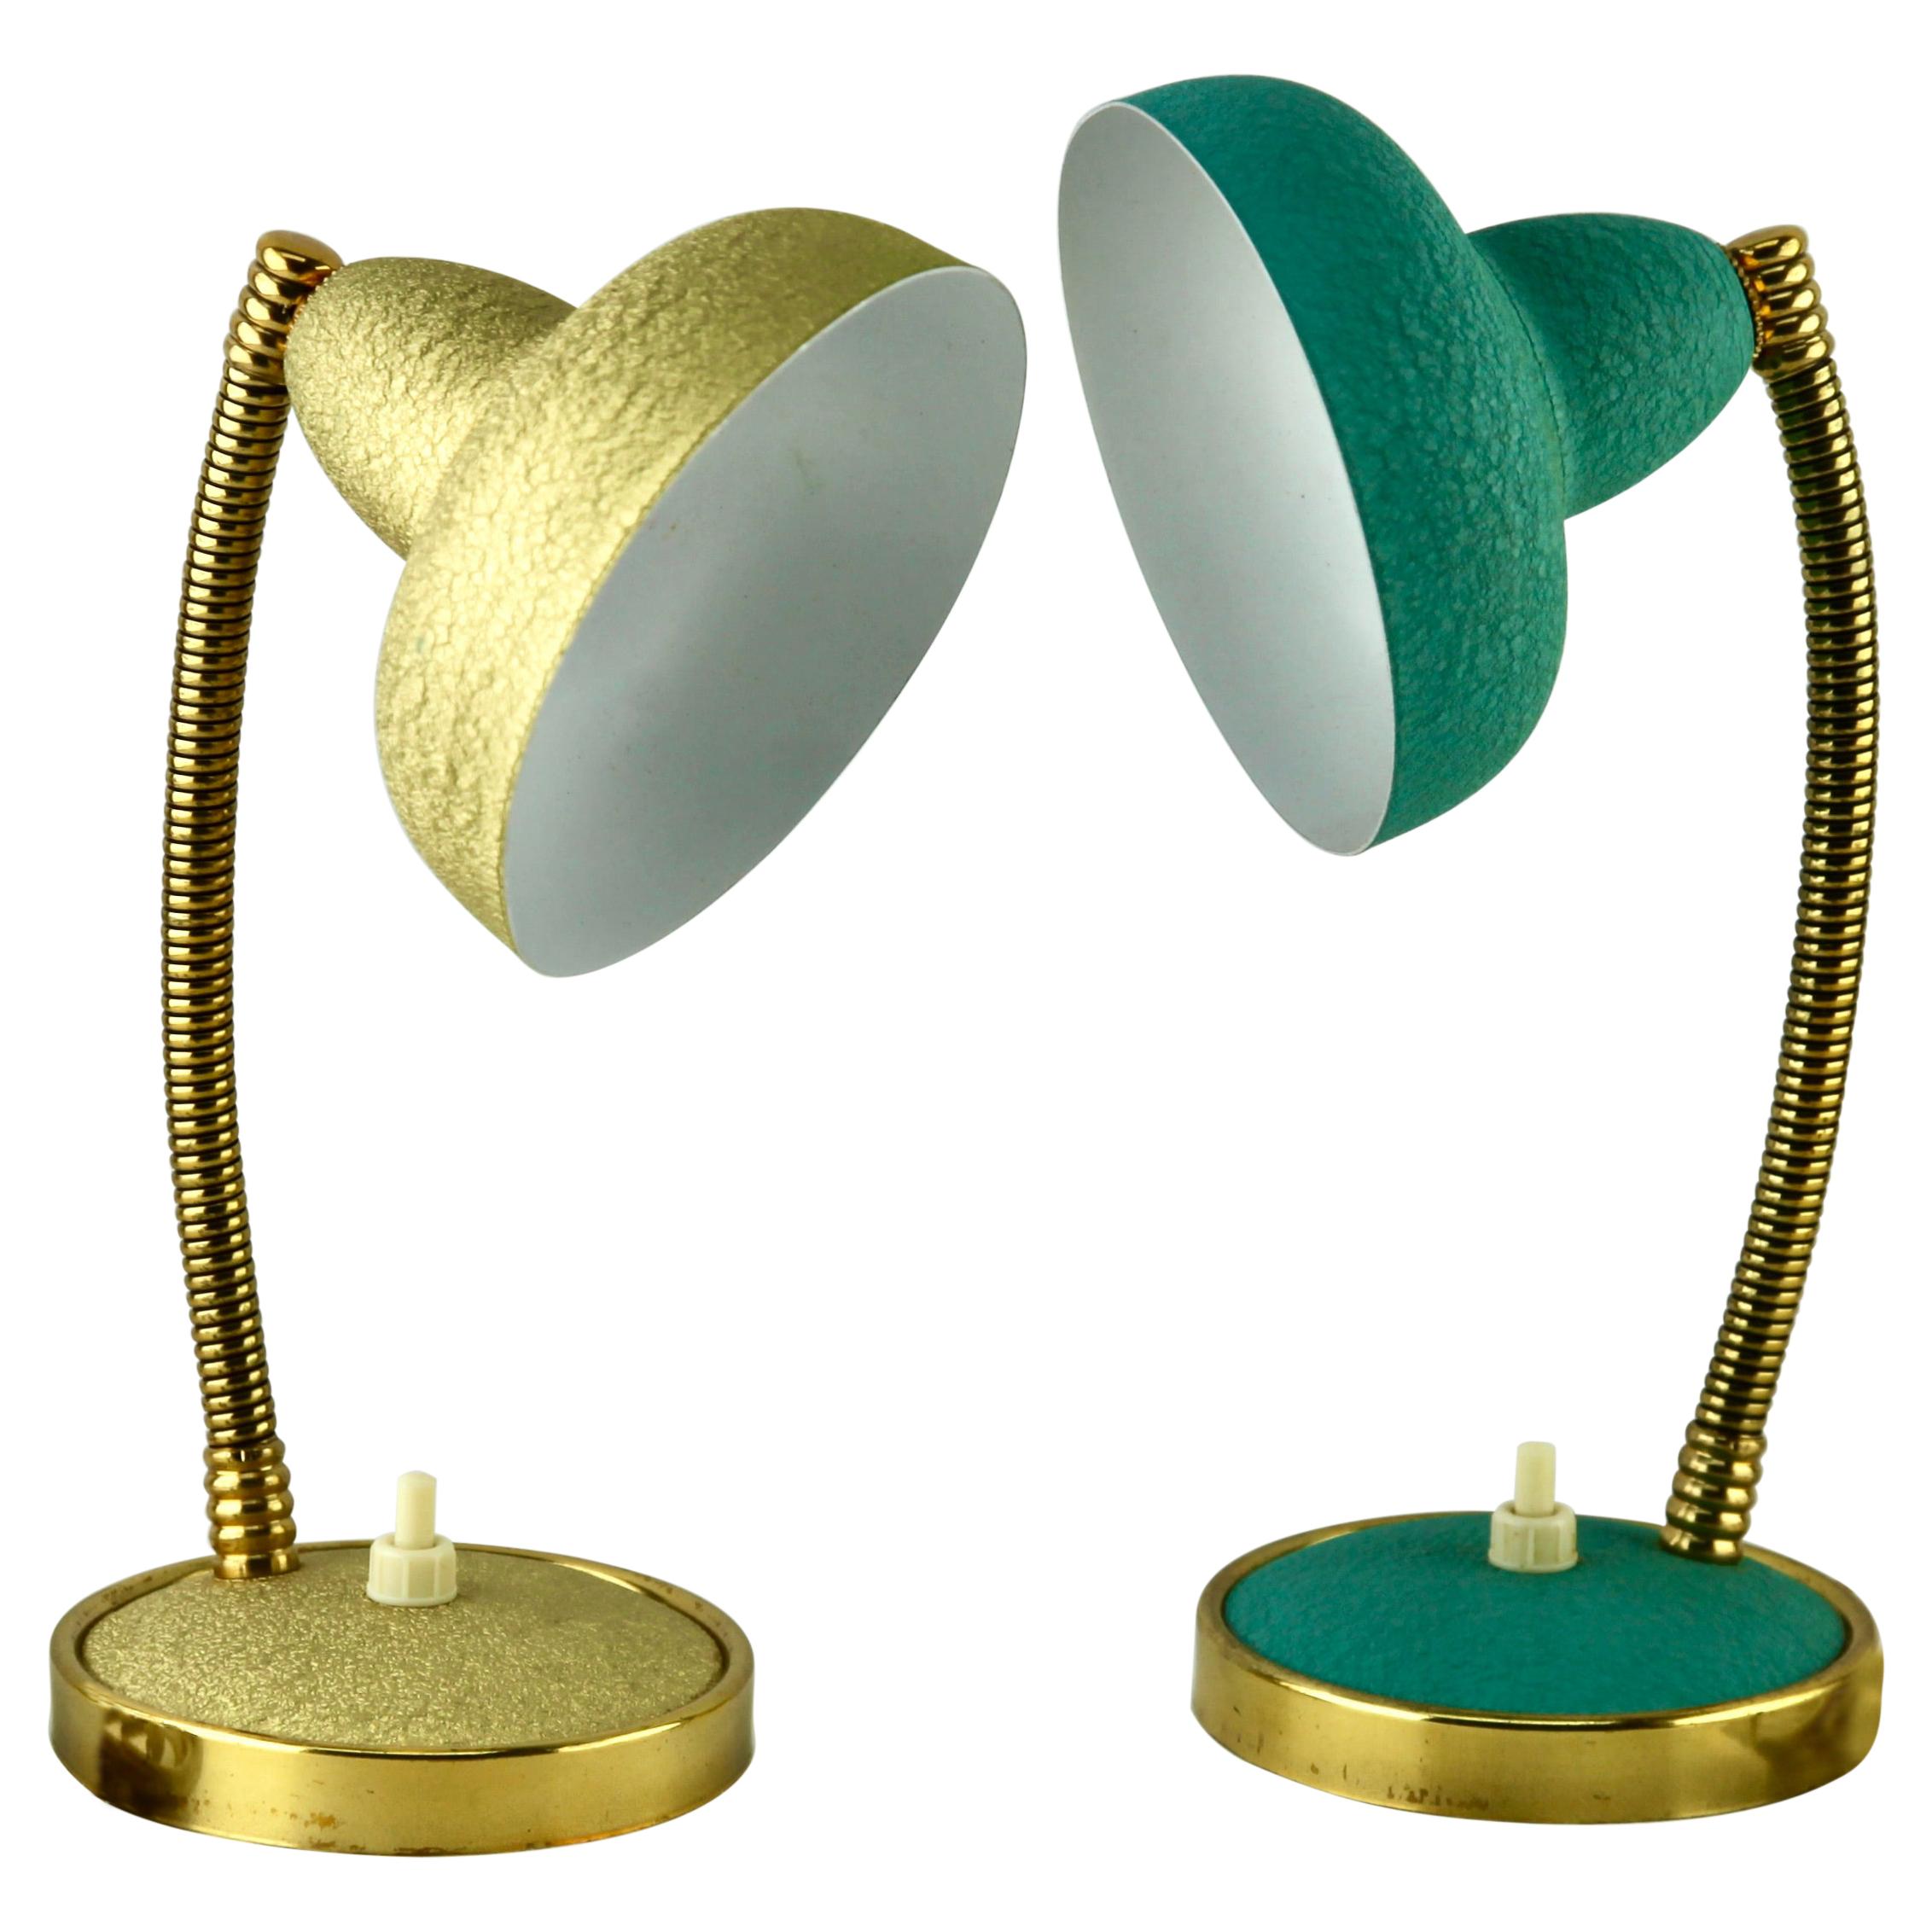 Vintage French Desk or Bedside Lamps from Aluminor France, 1950s